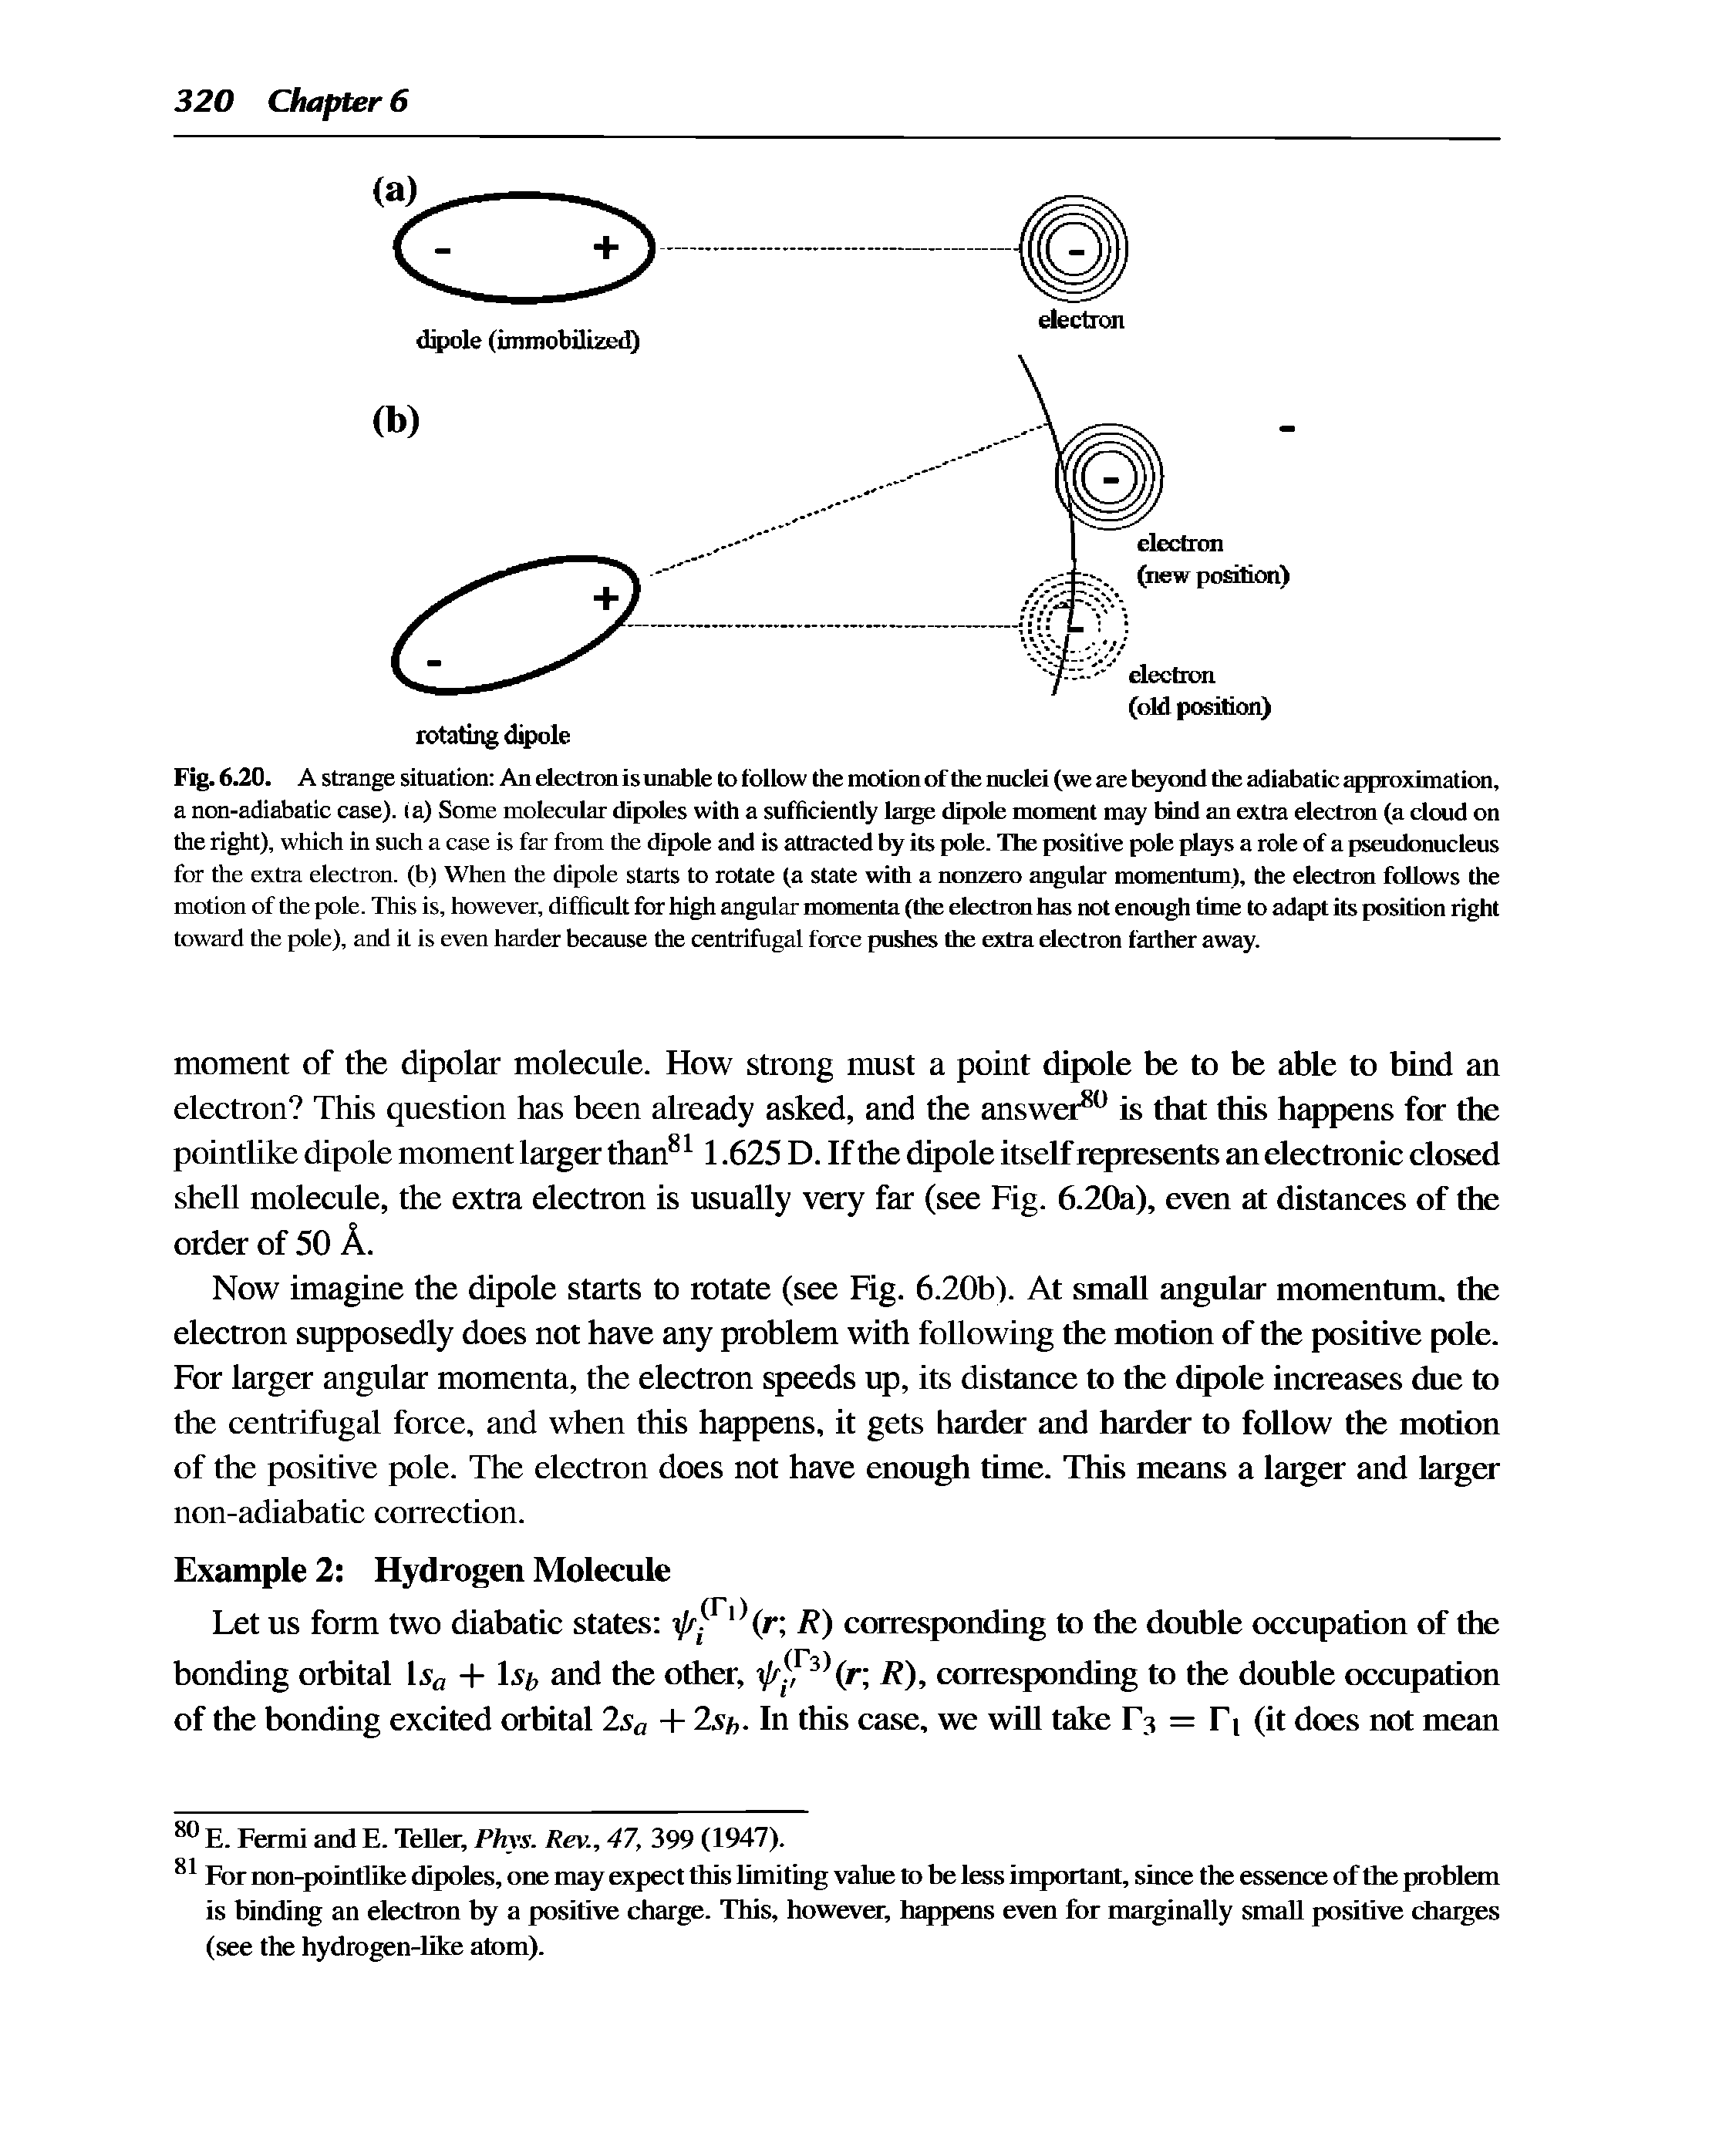 Fig. 6.20. A strange situation An election is unable to follow the motion of the nuclei (we are beyond the adiabatic approximation, a non-adiabatic case), ia) Some molecular dipoles with a sufficiently large dipole moment may bind an extra electron (a cloud on the right), which in such a case is far from the dipole and is attracted by its pole. The positive pole plays a role of a pseudonucleus for the extra electron, (b) When the dipole starts to rotate (a state with a nonzero angular momentum), the electron follows the motion of the pole. This is, however, difficult for high angular momenta (the electron has not enough time to adapt its position right toward the pole), and it is even harder because the centrifugal force pushes the extra electron farther away.